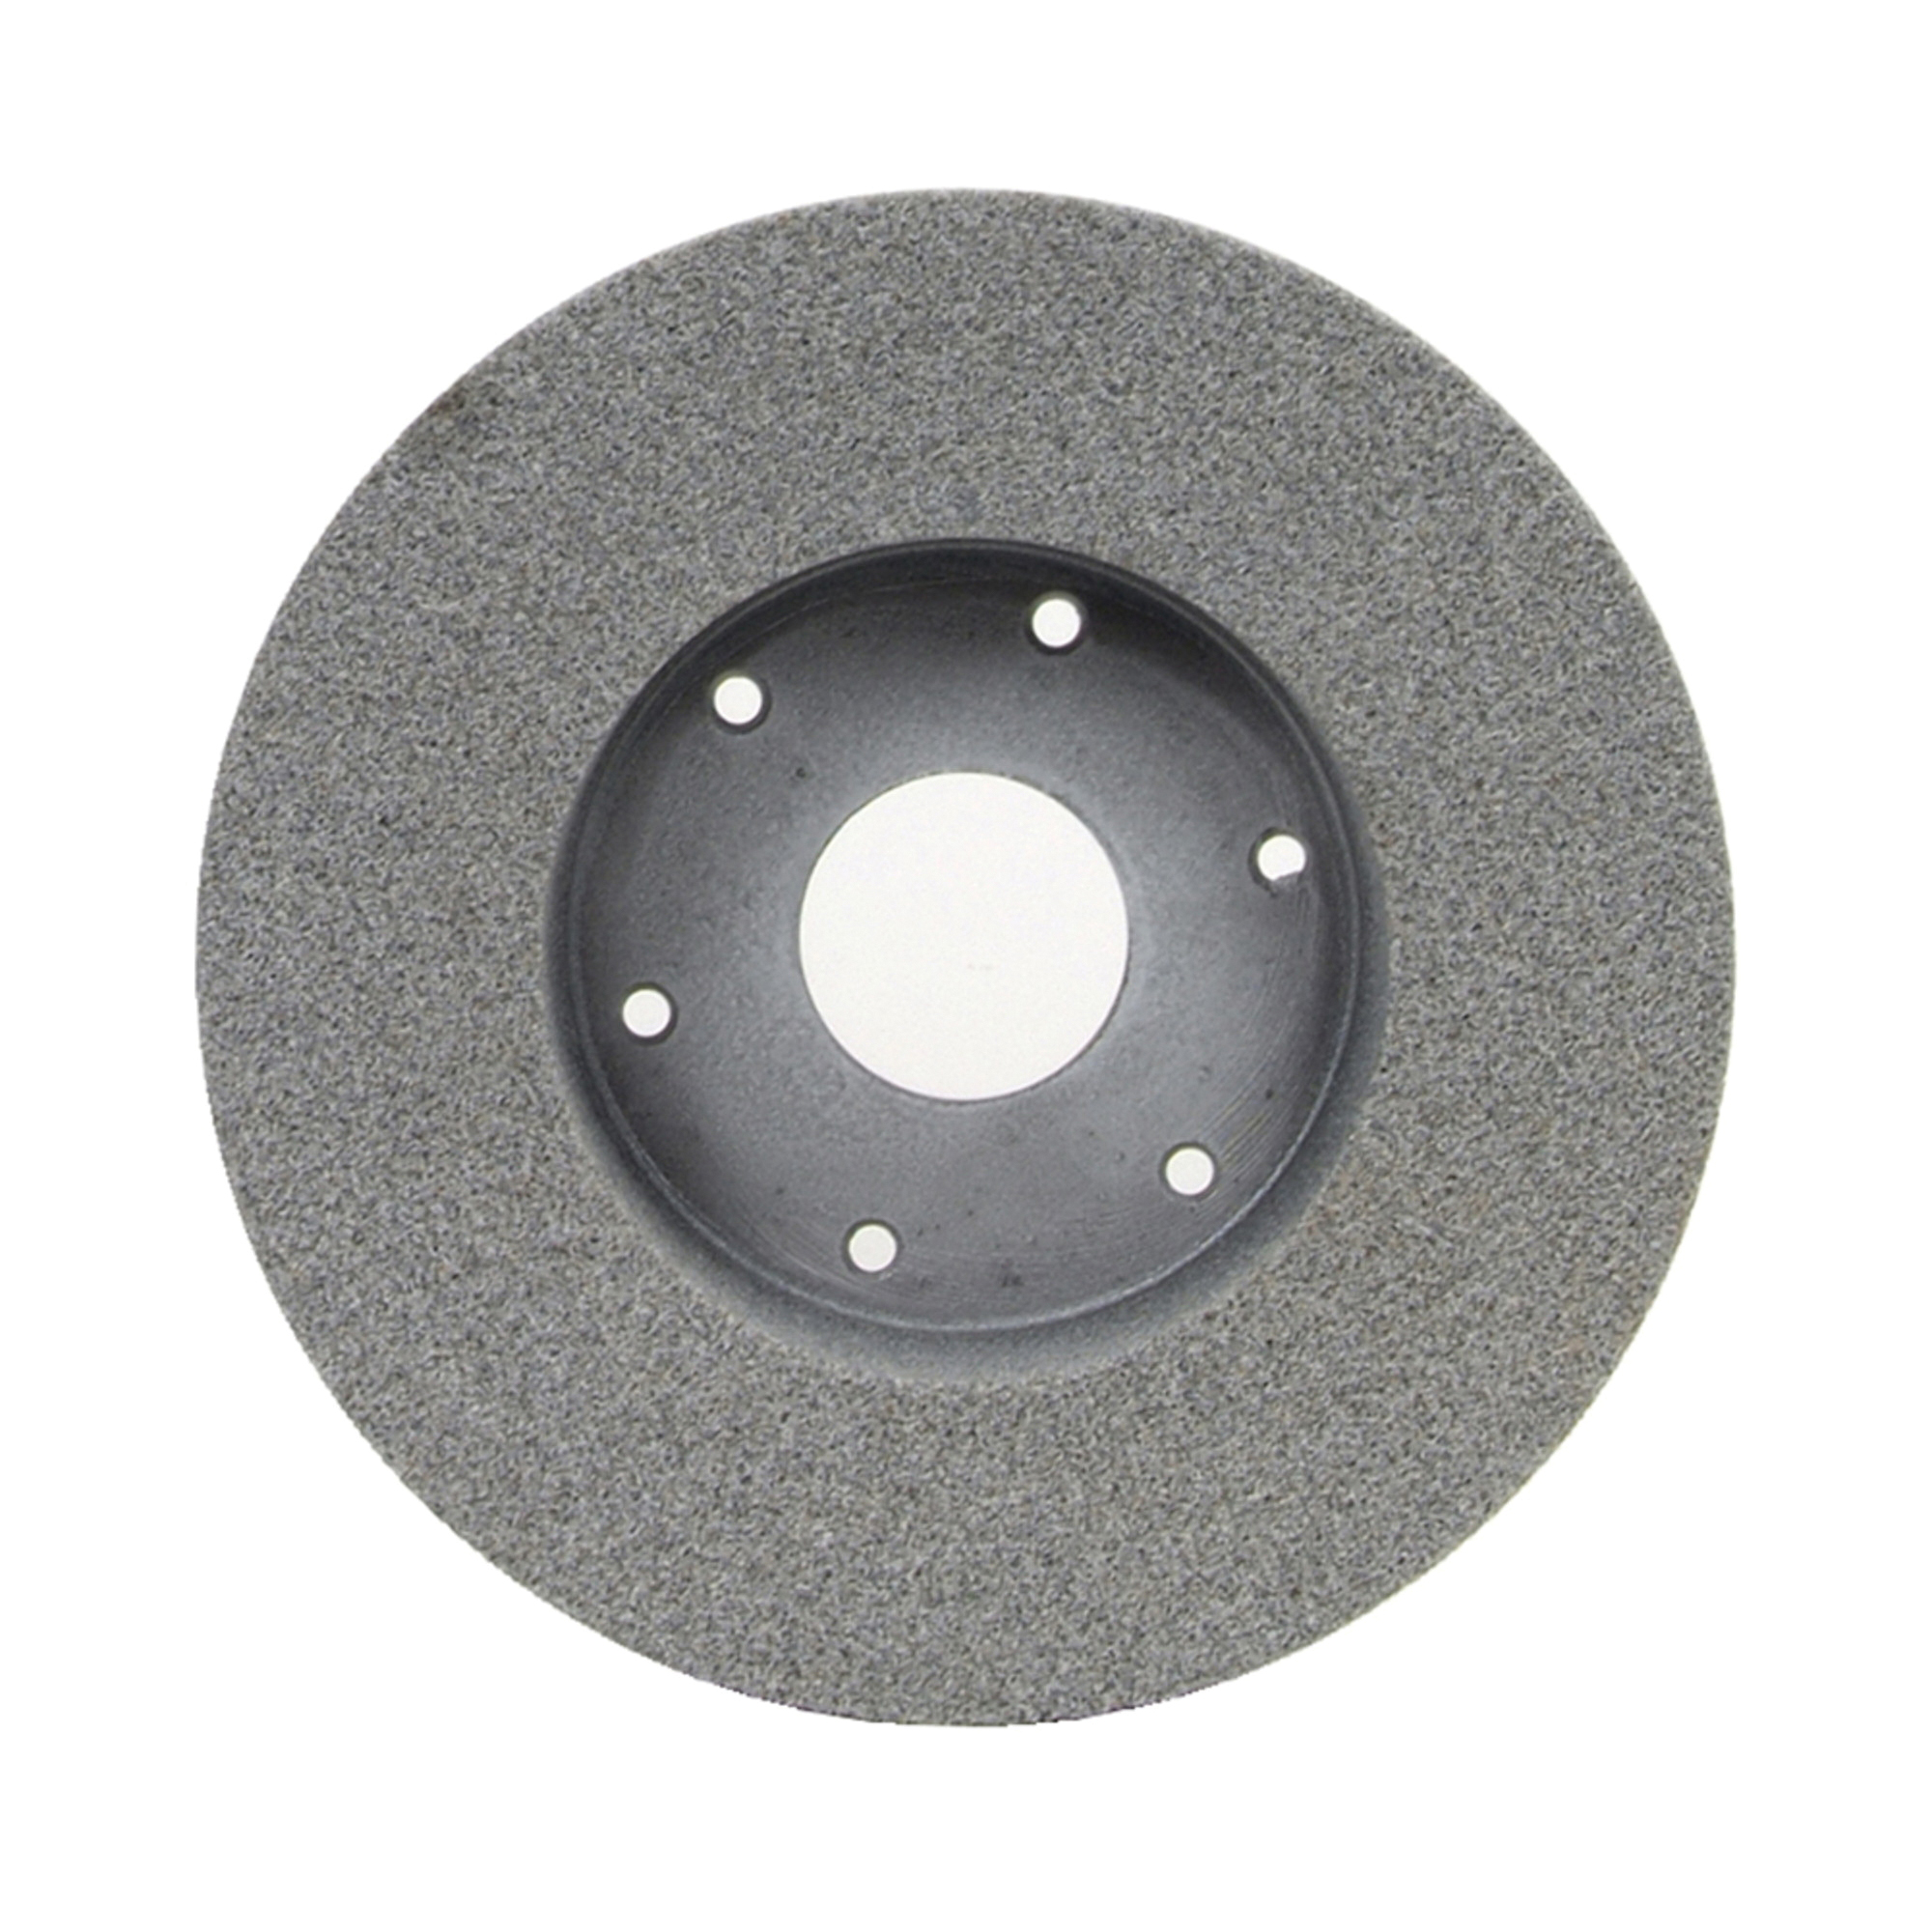 Norton® 66253049115 32A Plate Mounted Toolroom Wheel, 9 in Dia x 2 in THK, 4-15/16 in Center Hole, 46 Grit, Aluminum Oxide Abrasive